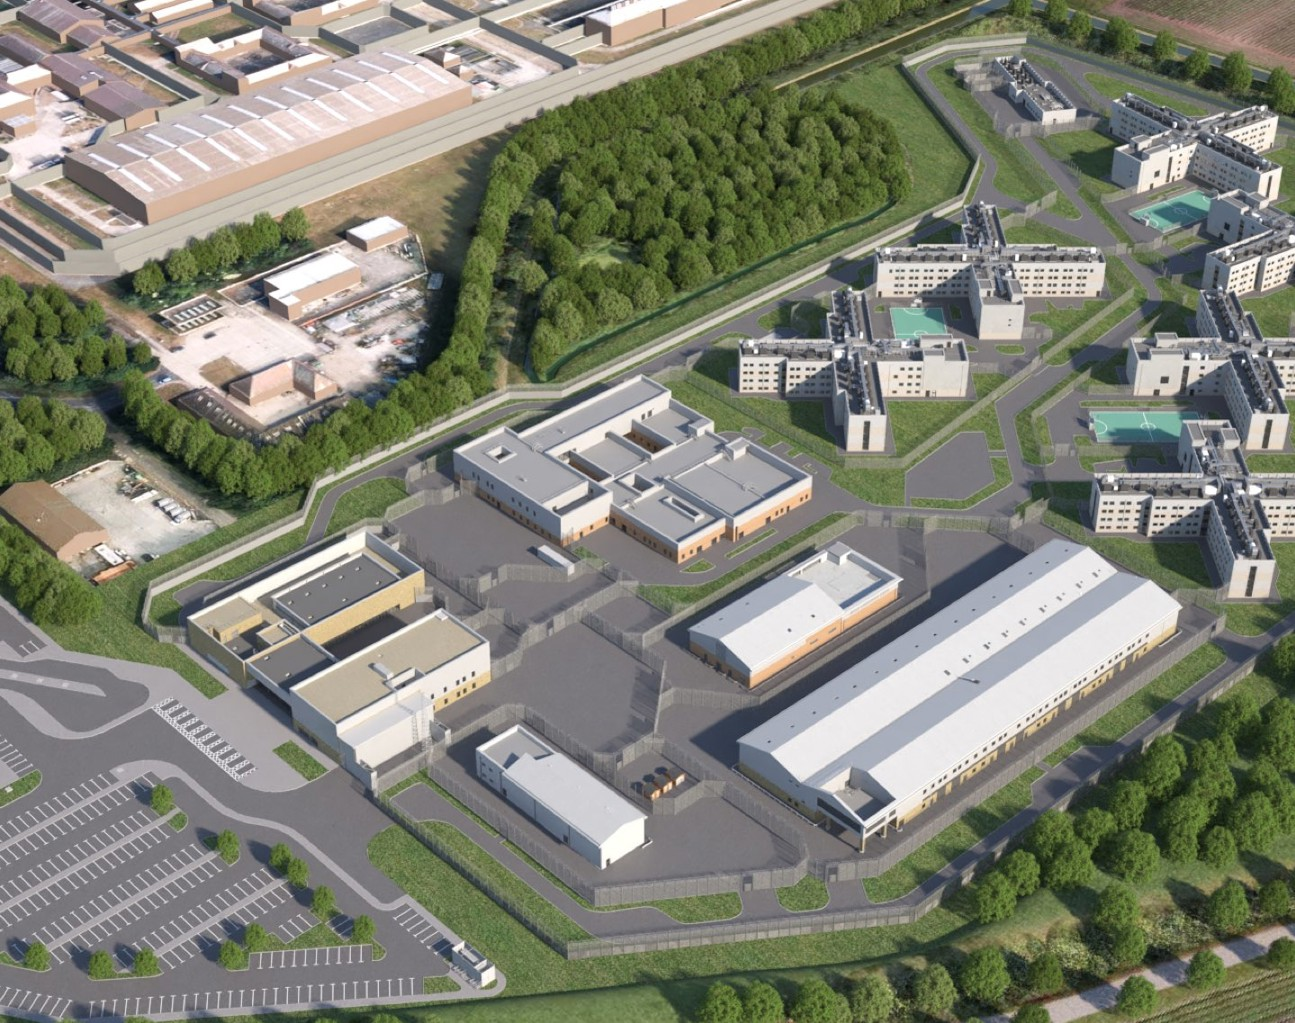 Building the UK’s first all-electric prison